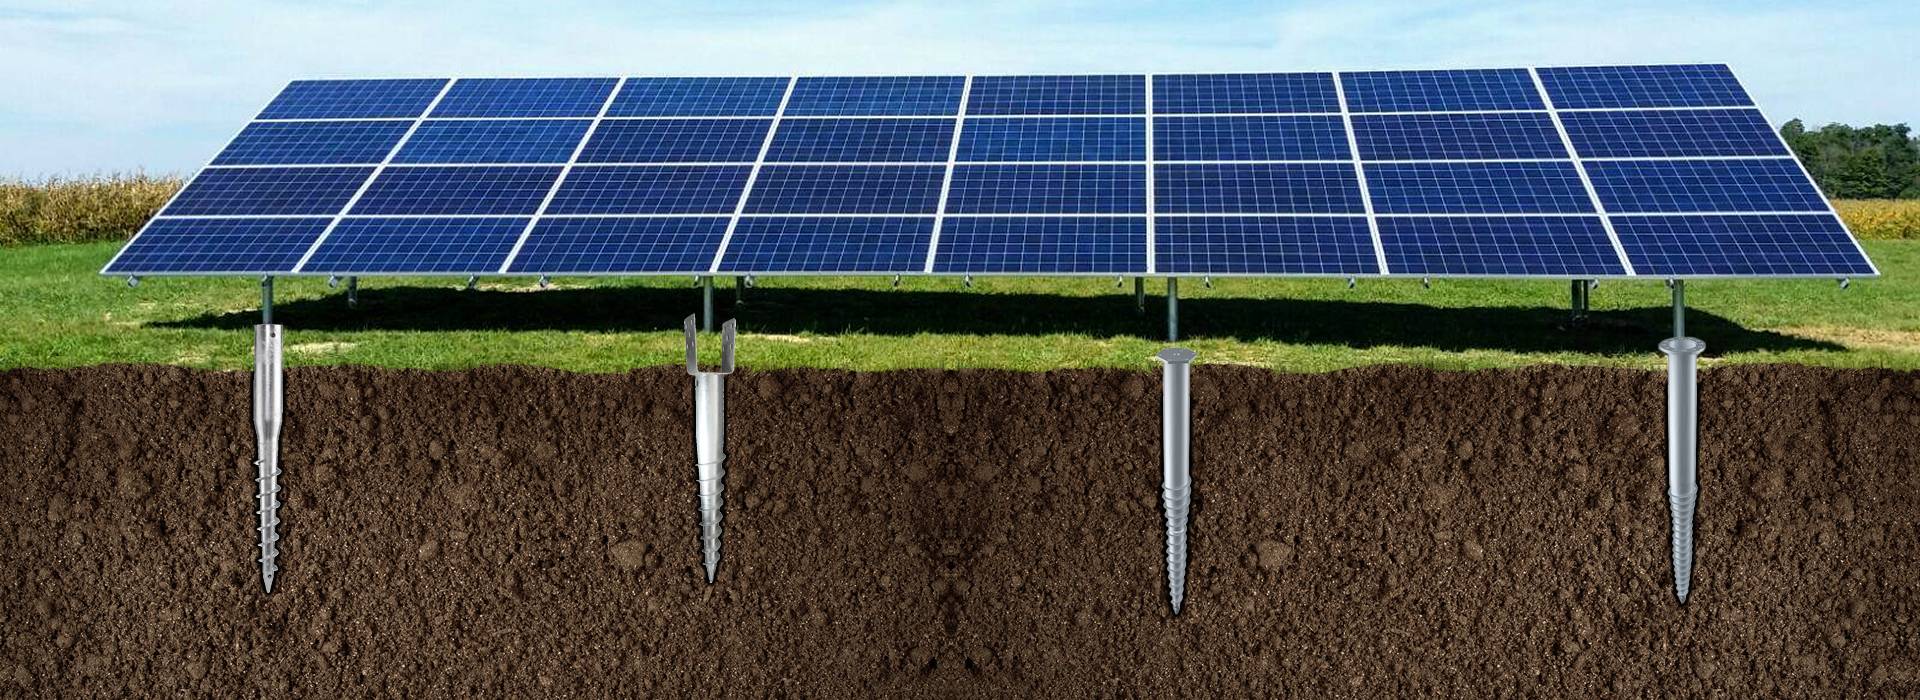 A piece of solar panels fixed on the grassland with different types of post screws.